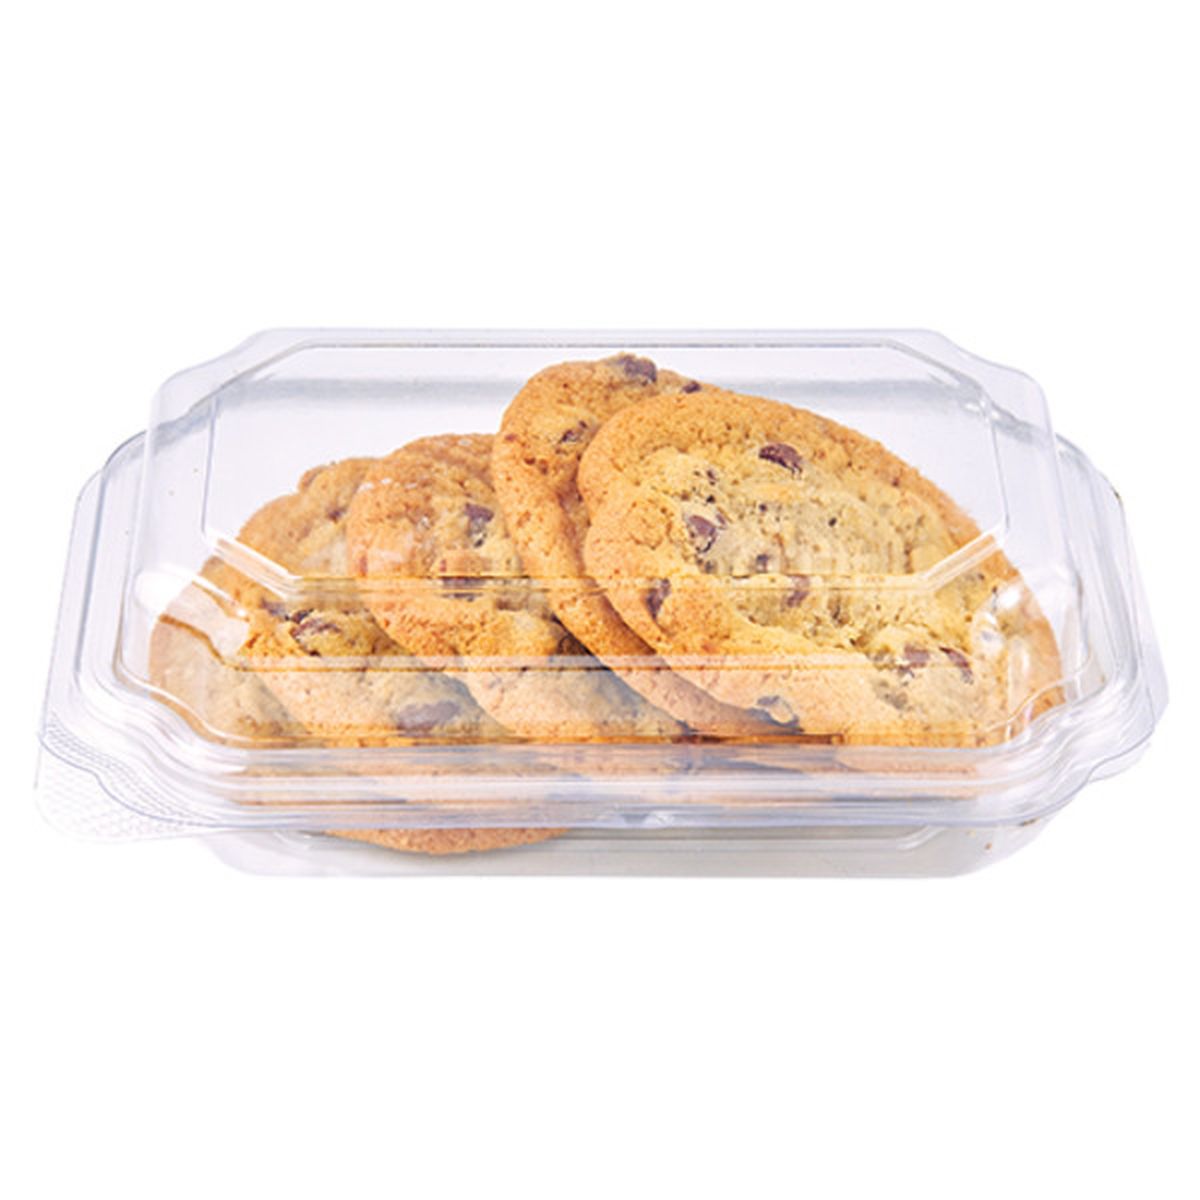 Calories in Wegmans Ultimate Chocolate Chip Cookie 5 pk